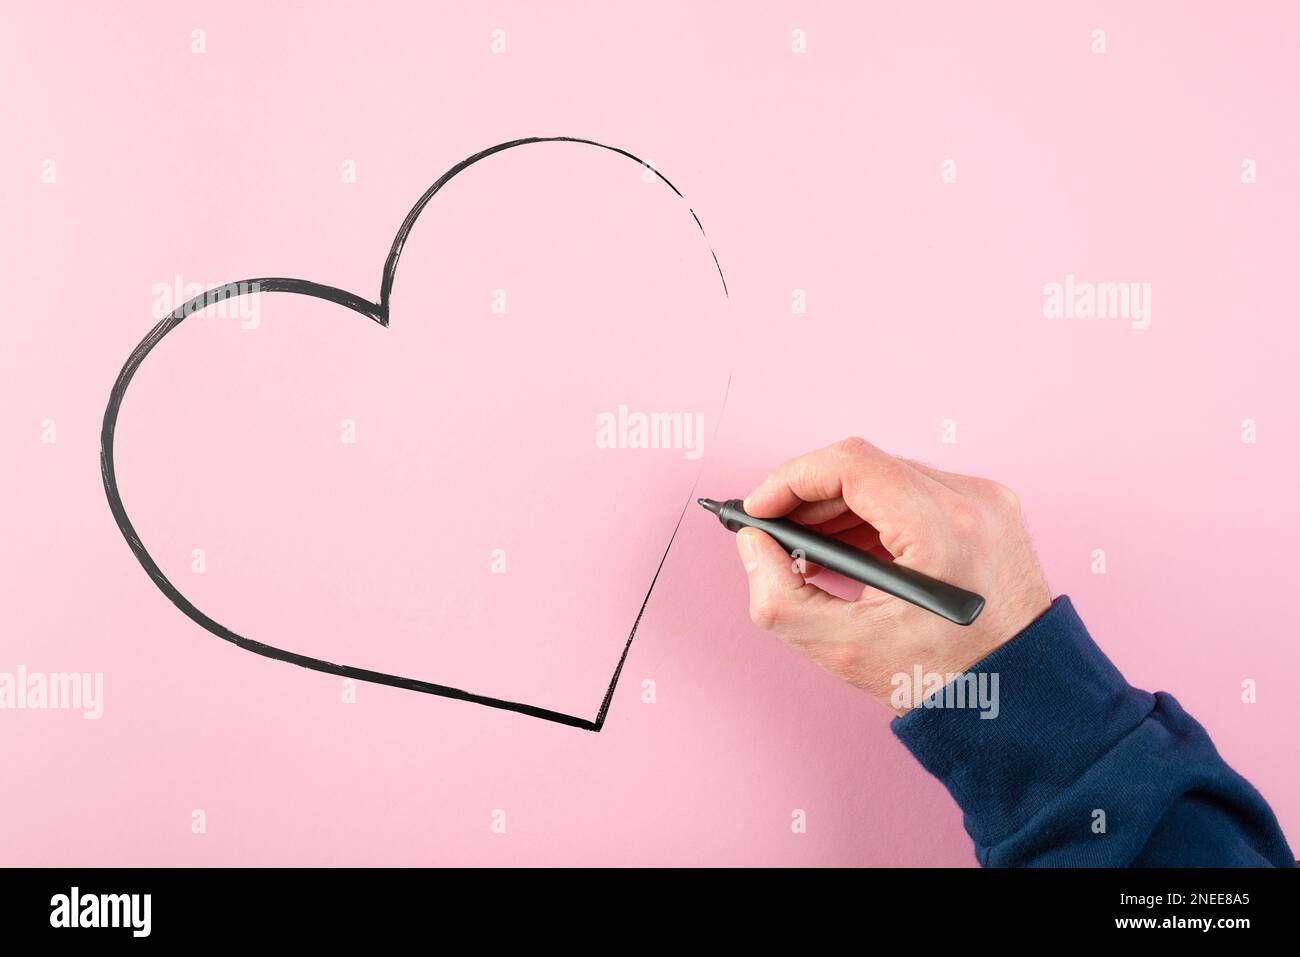 hand drawing heart shape using felt tip pen on pink background, love and affection concept Stock Photo